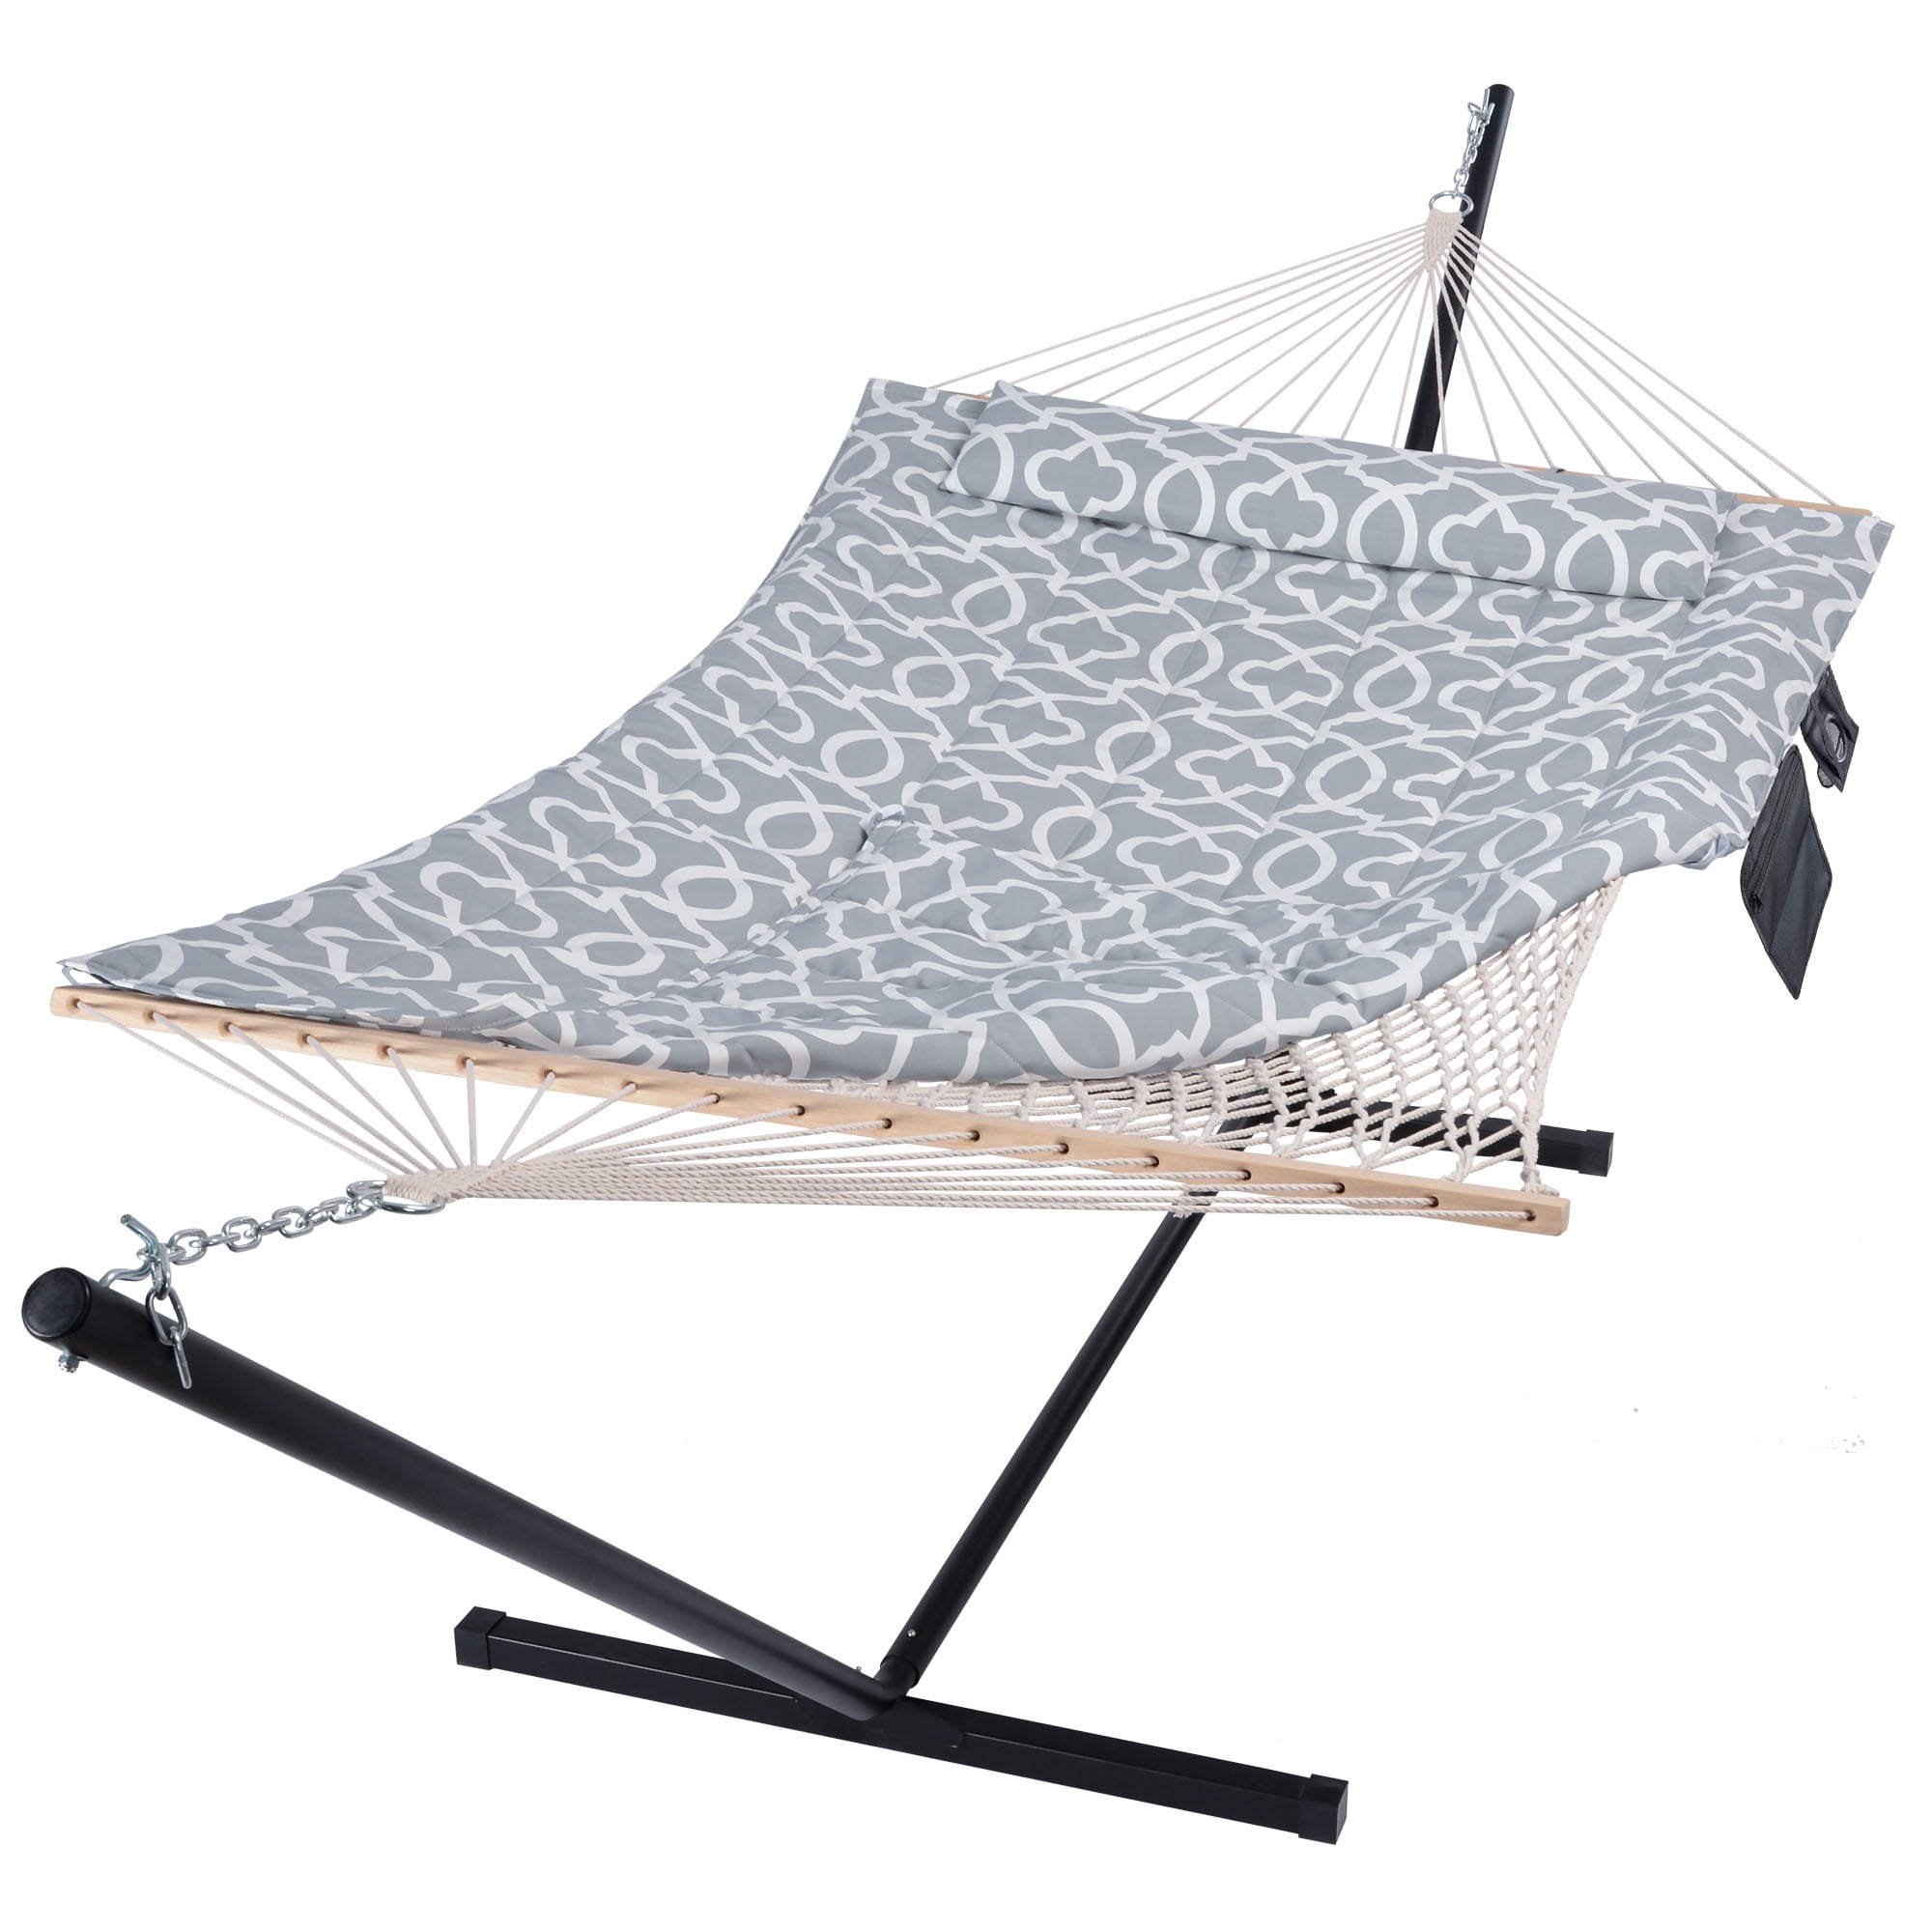 Gafete Large Thicker Hammock with Stand Included 2 Person Heavy Duty Outside Portable Cotton Double Hammocks with Hardwood Spreader Bar and Pillow for Outdoor Navy Max 475lbs Capacity